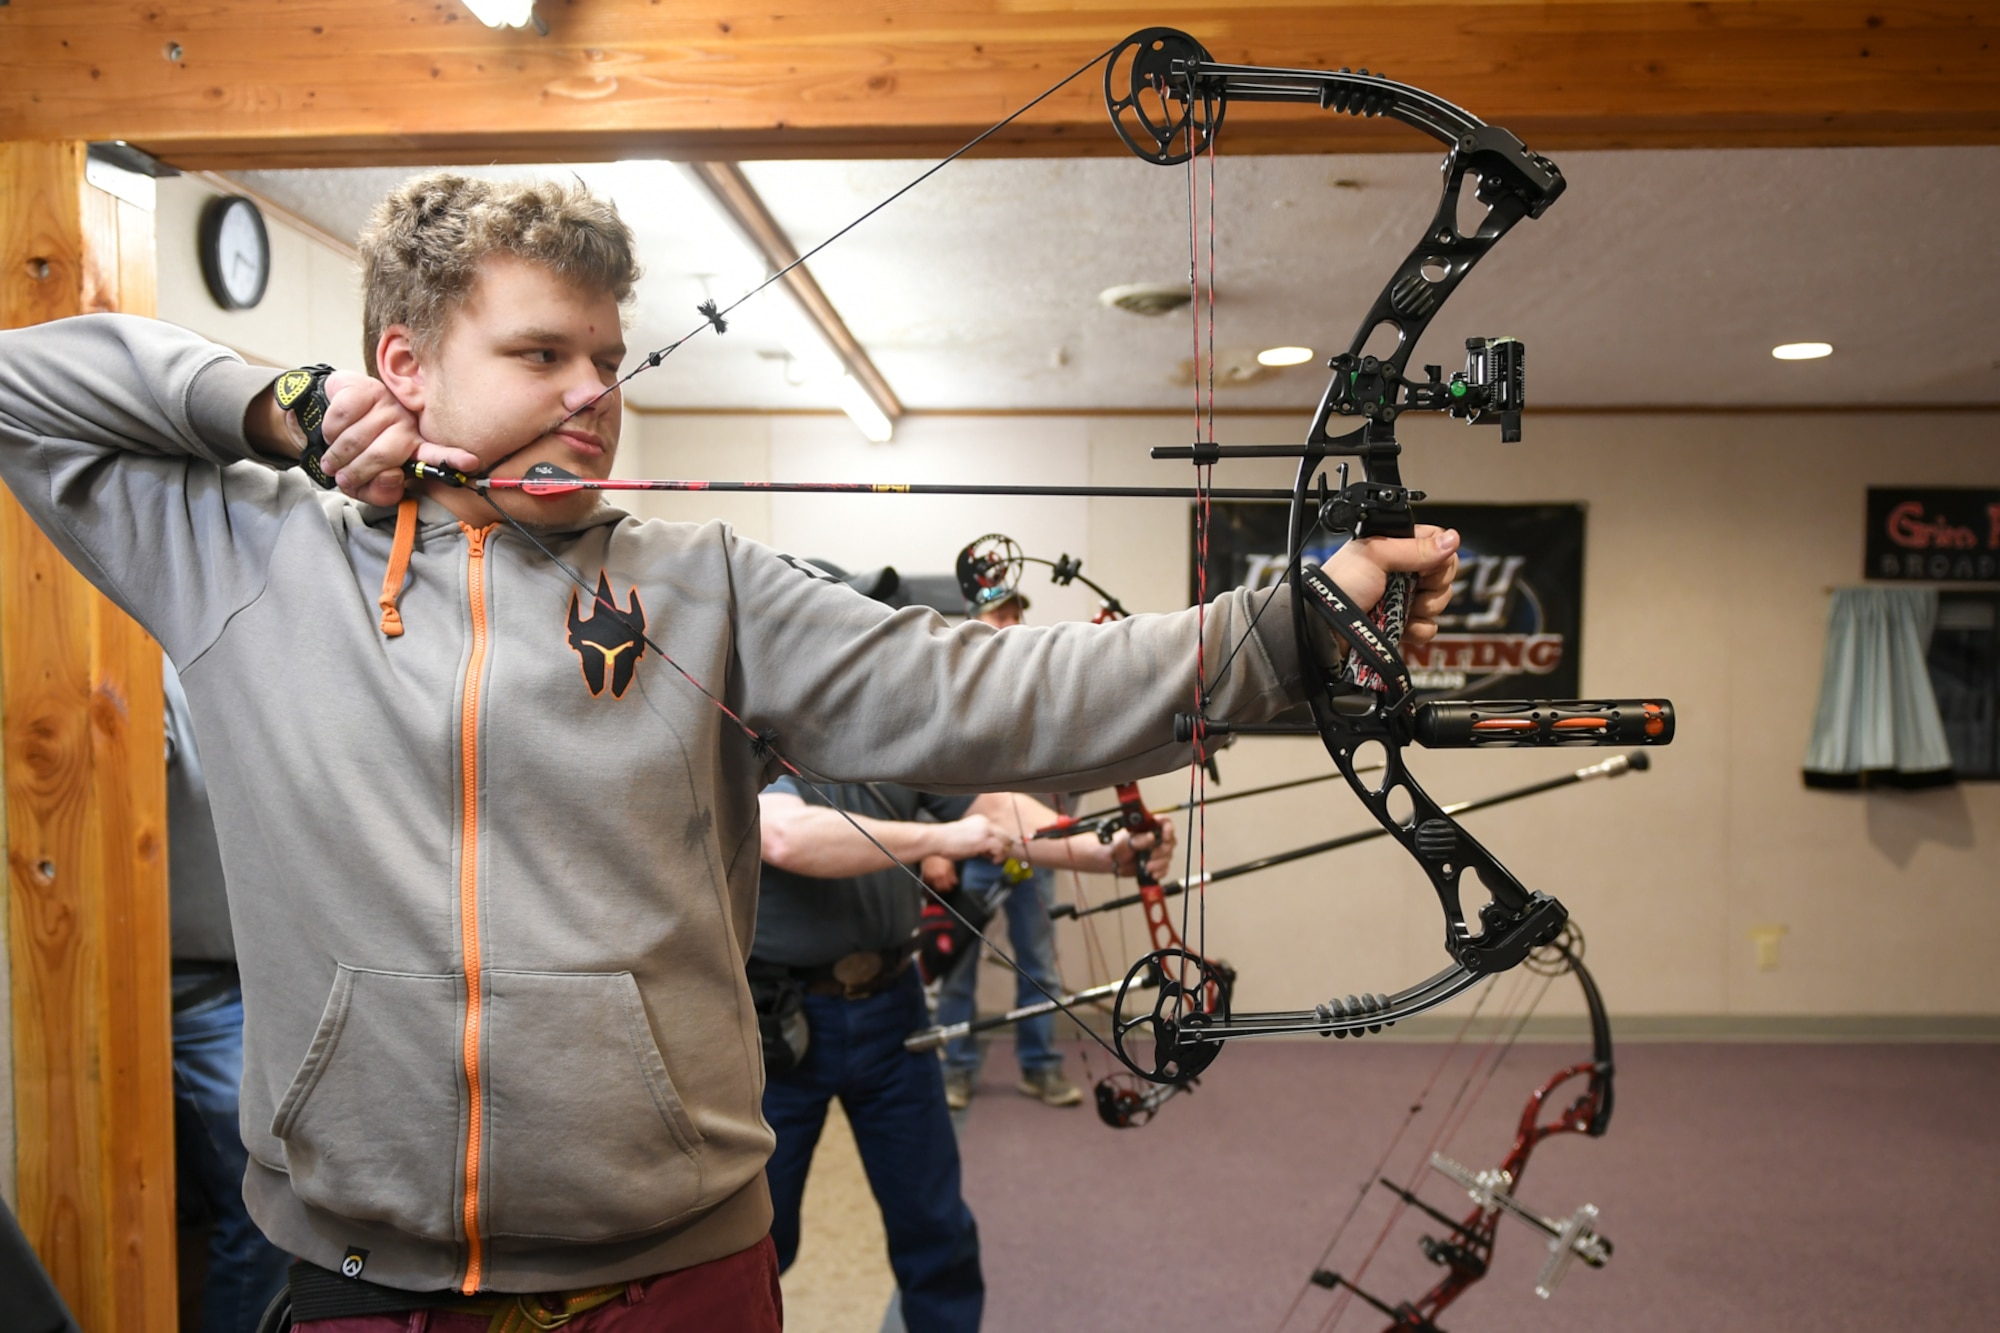 Kevin Tracy aims his compound bow at a three-spot target during a Hill Archery Club league night Dec. 13, 2018, at Hill Air Force Base, Utah. Besides access to the clubhouse and ranges 24/7, Hill club members are also invited to participate in several archery events throughout the year. (U.S. Air Force photo by Cynthia Griggs)